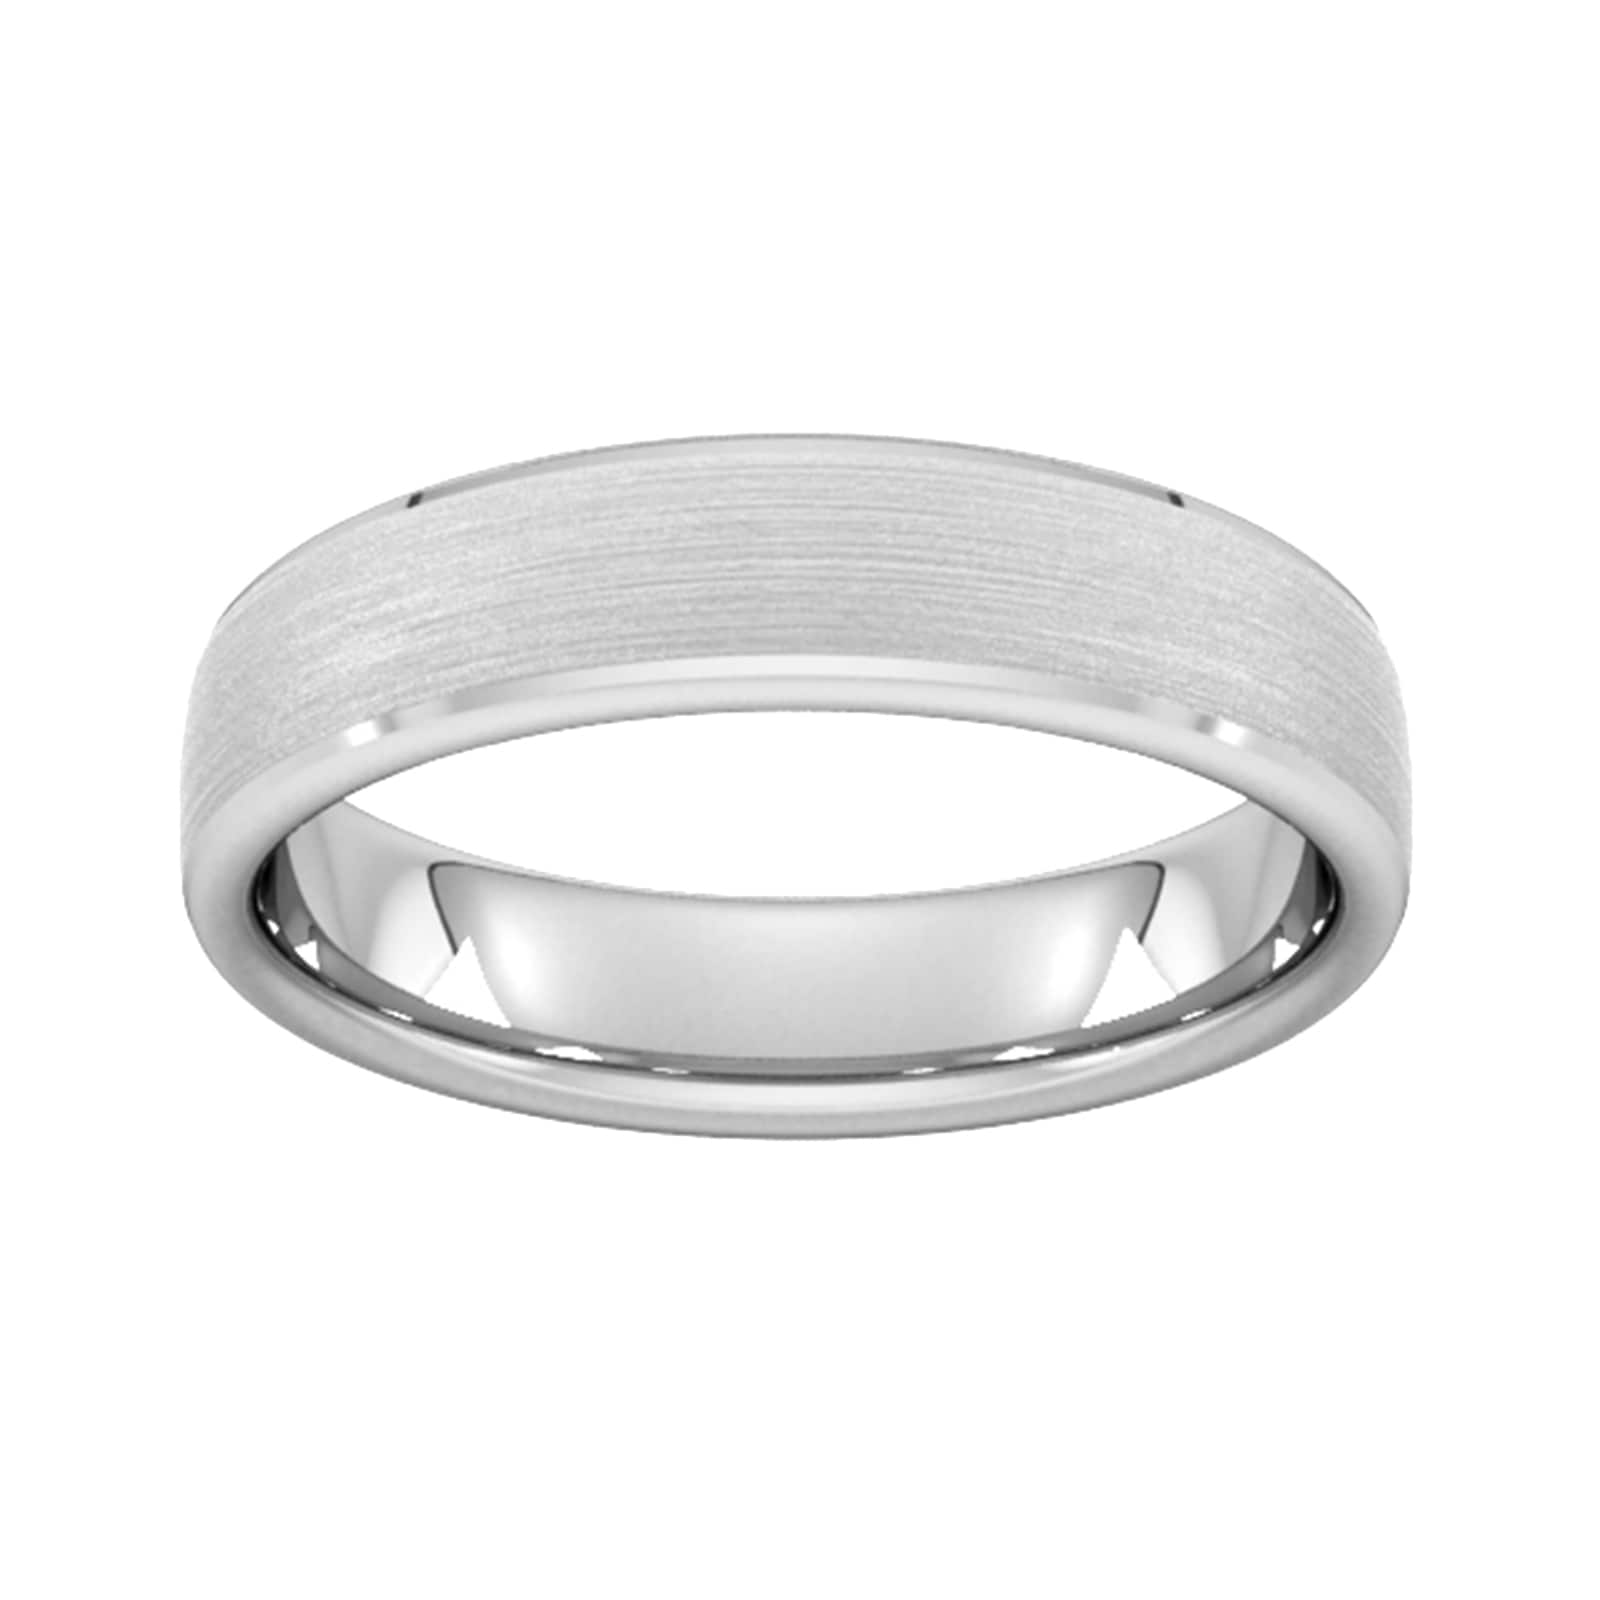 5mm Traditional Court Heavy Polished Chamfered Edges With Matt Centre Wedding Ring In 9 Carat White Gold - Ring Size T